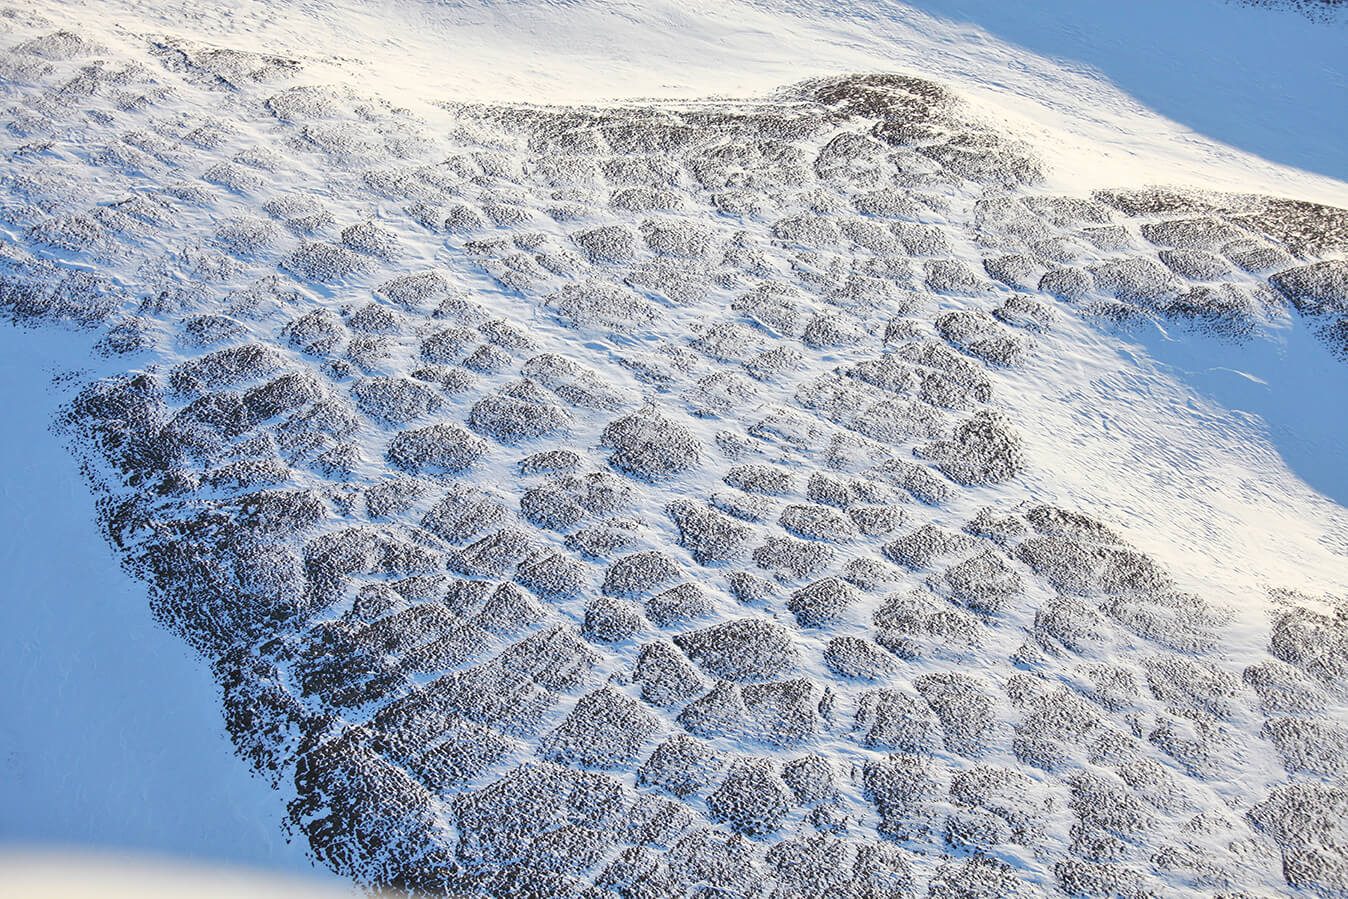 A bird’s-eye view of the northern landsape covered by permafrost